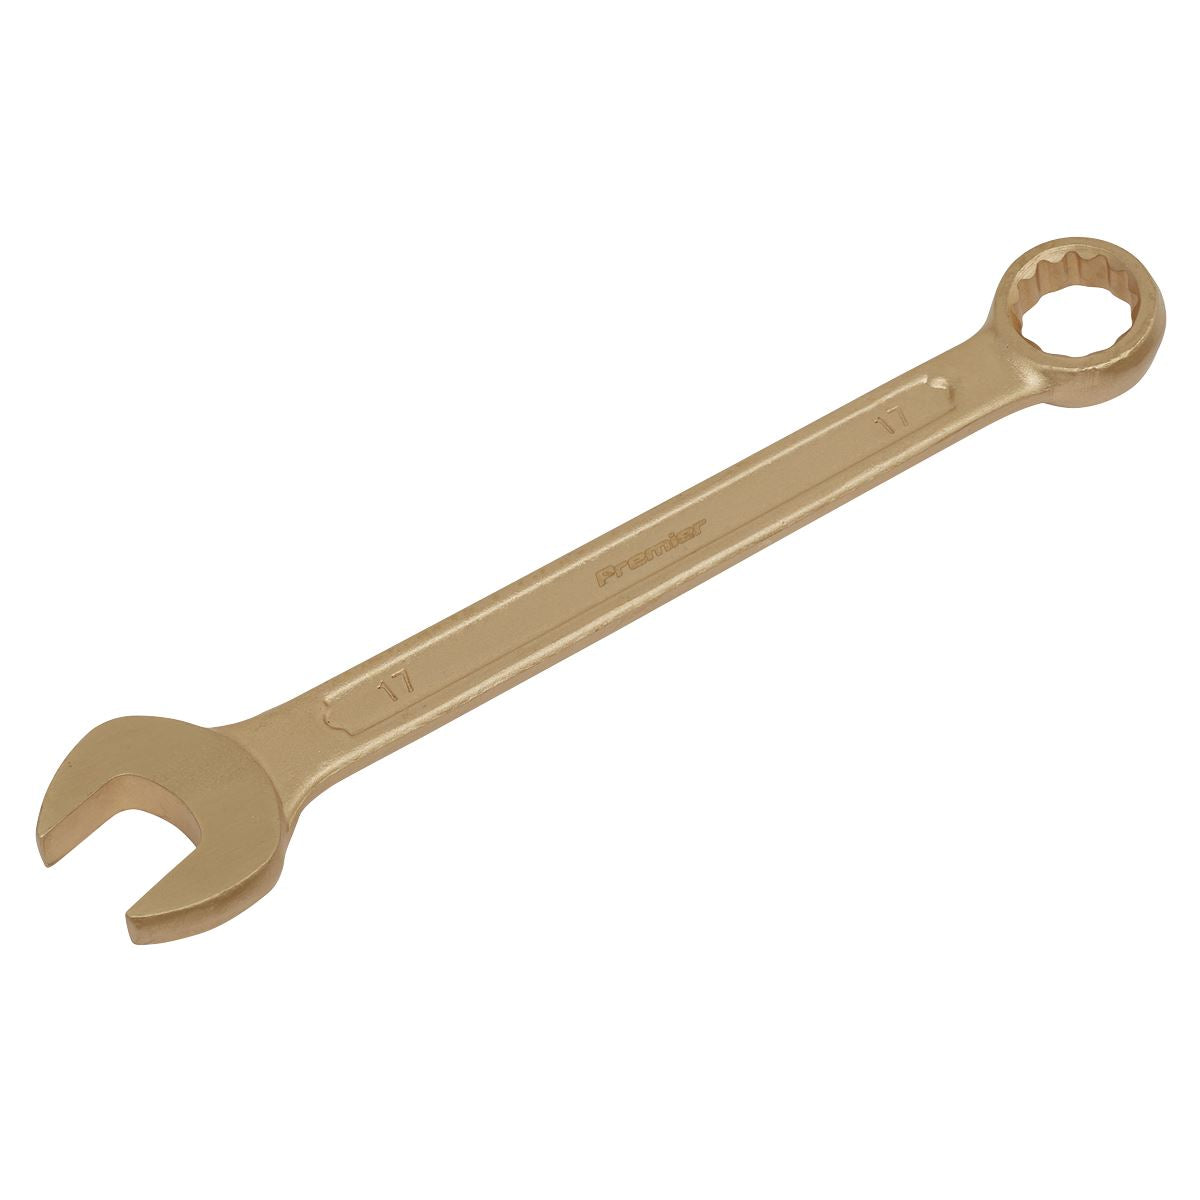 Sealey Premier Combination Spanner 17mm - Non-Sparking